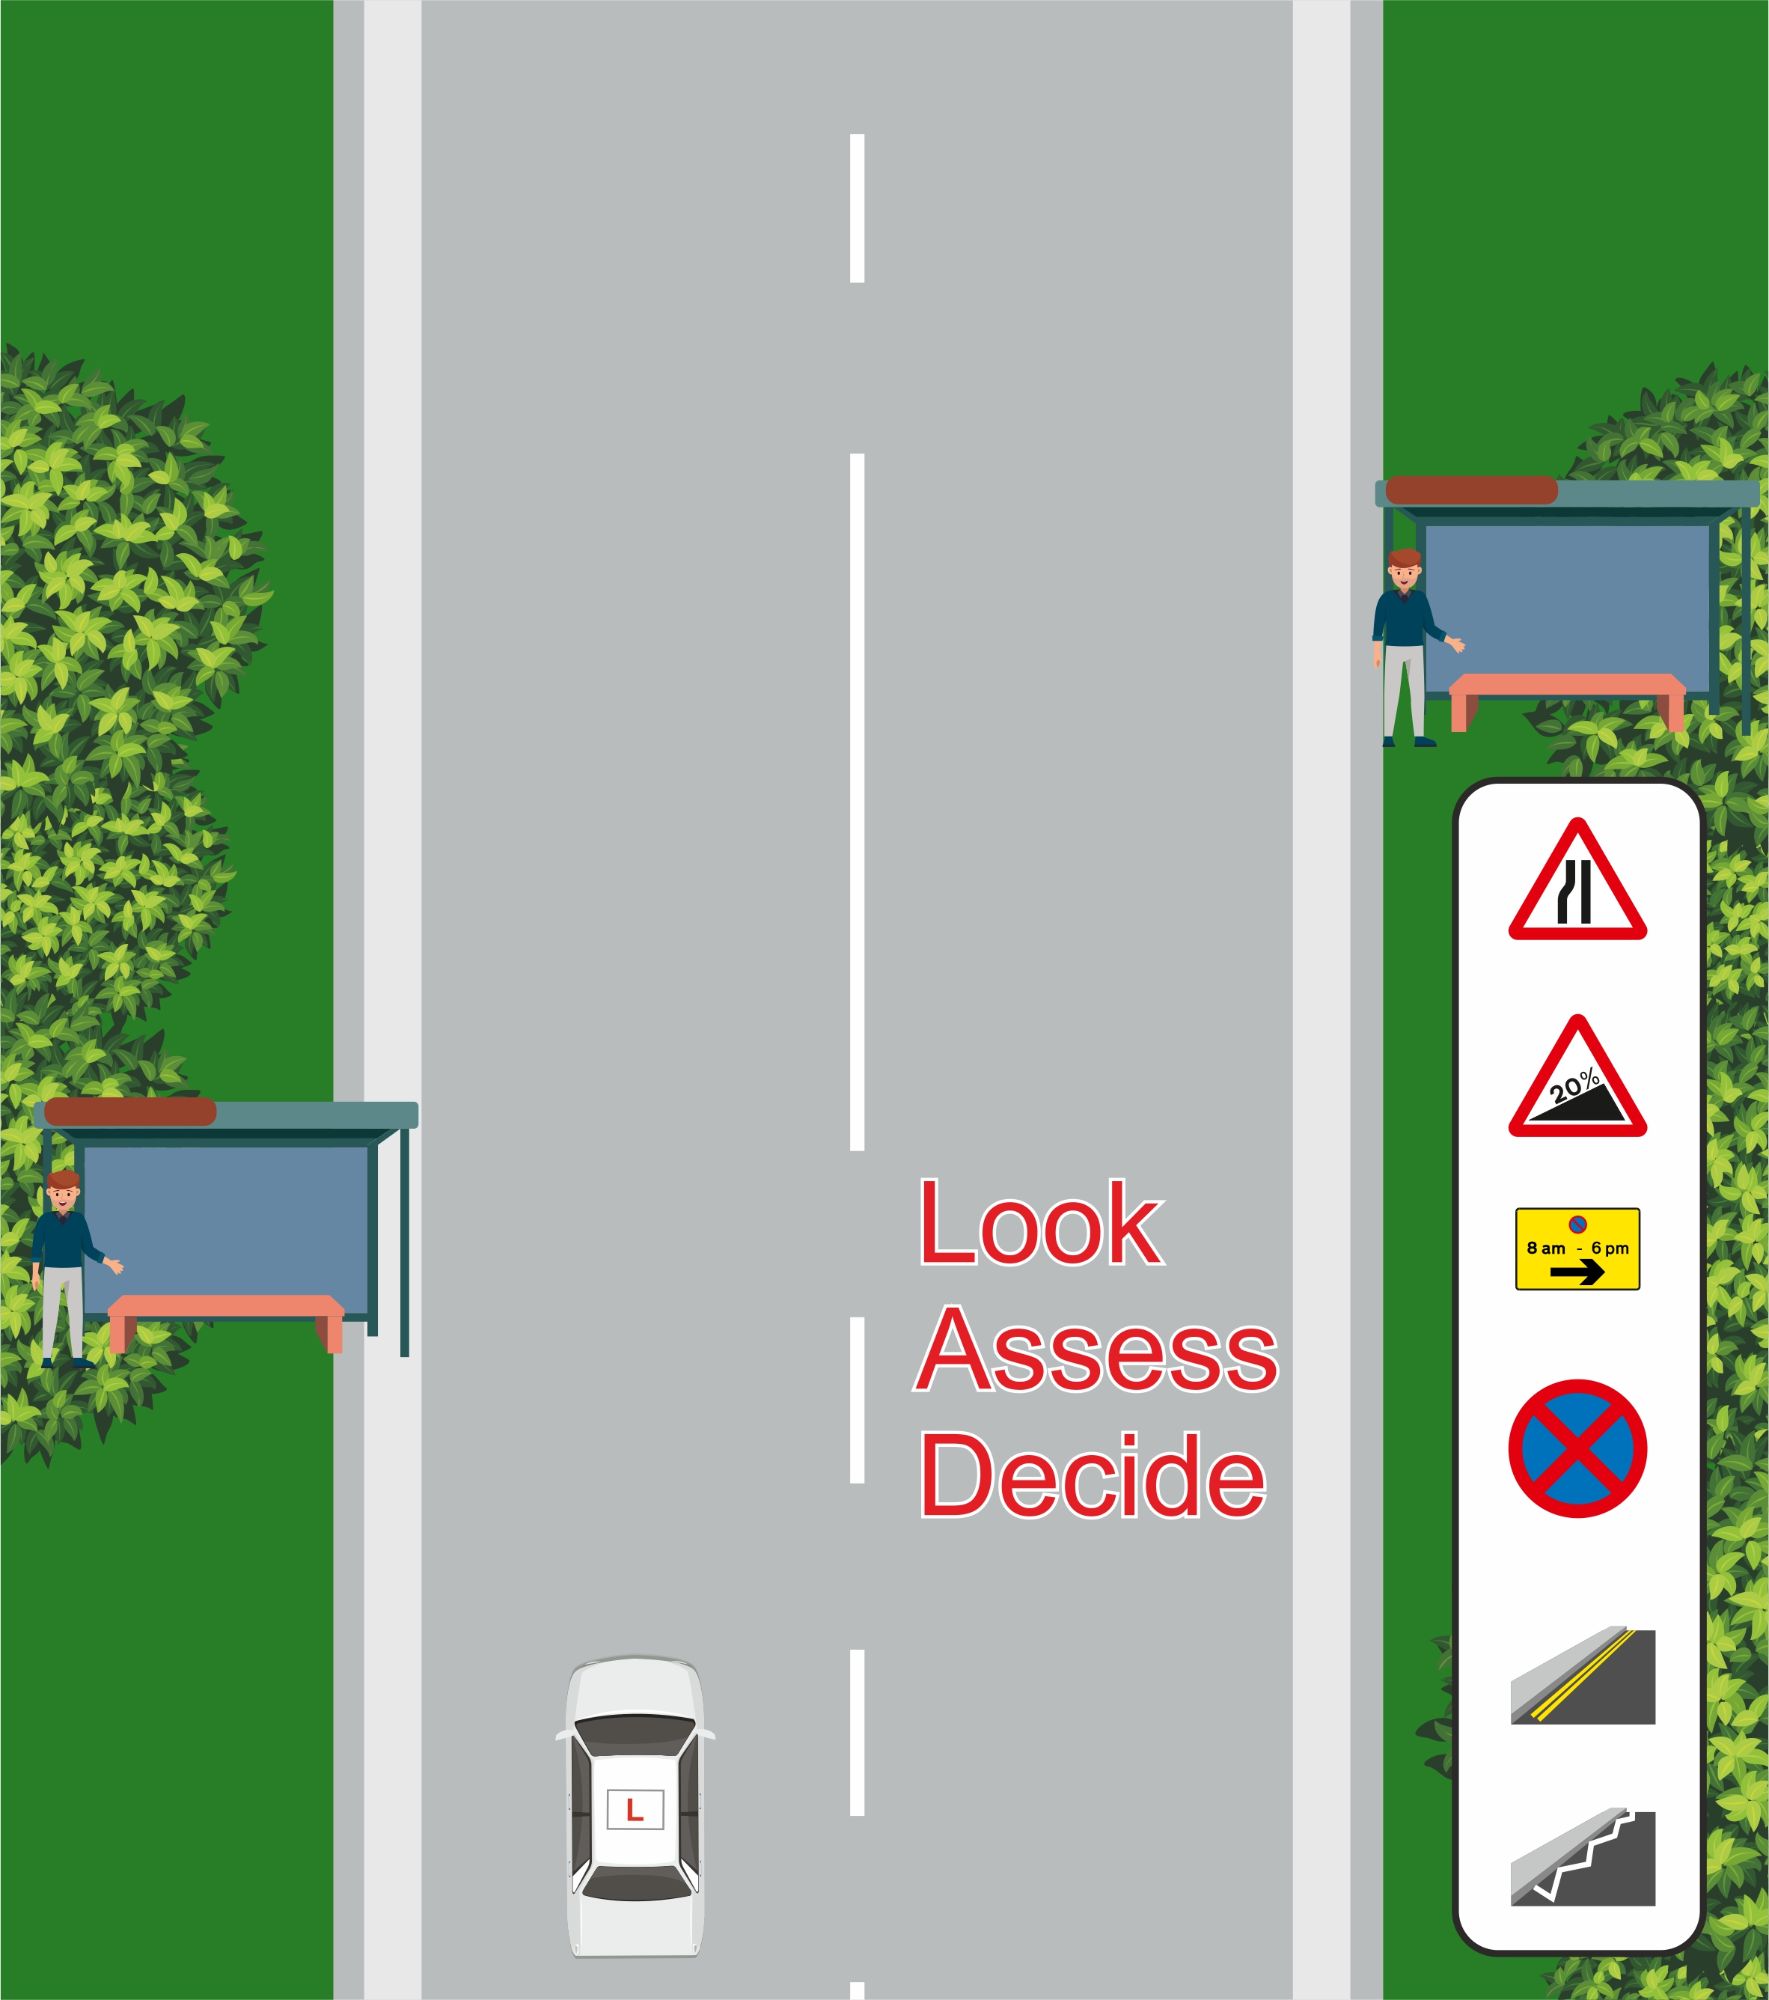 The first thing you should do is look for somewhere safe and legal to do the manoeuvre. The examiner wonâ€™t tell you where to do it, so you will need your thinking cap on.  A routine that is often used is â€œLADAâ€. This stands for Look, Assess, Decide then Act.  Firstly, identify a safe place to pull up on the right.  **Doing it in a bus stop area, zigzag lines, double yellow lines, bends etc. would not be safe or legal.***  Look for a large available space so you can pull up on the right without having to swerve to get in (you donâ€™t have to stop behind another vehicle).  Try not to stop on the right so youâ€™re blocking a driveway too.  Once you have identified a safe place ahead and in good time, you then need to decide if it is safe.